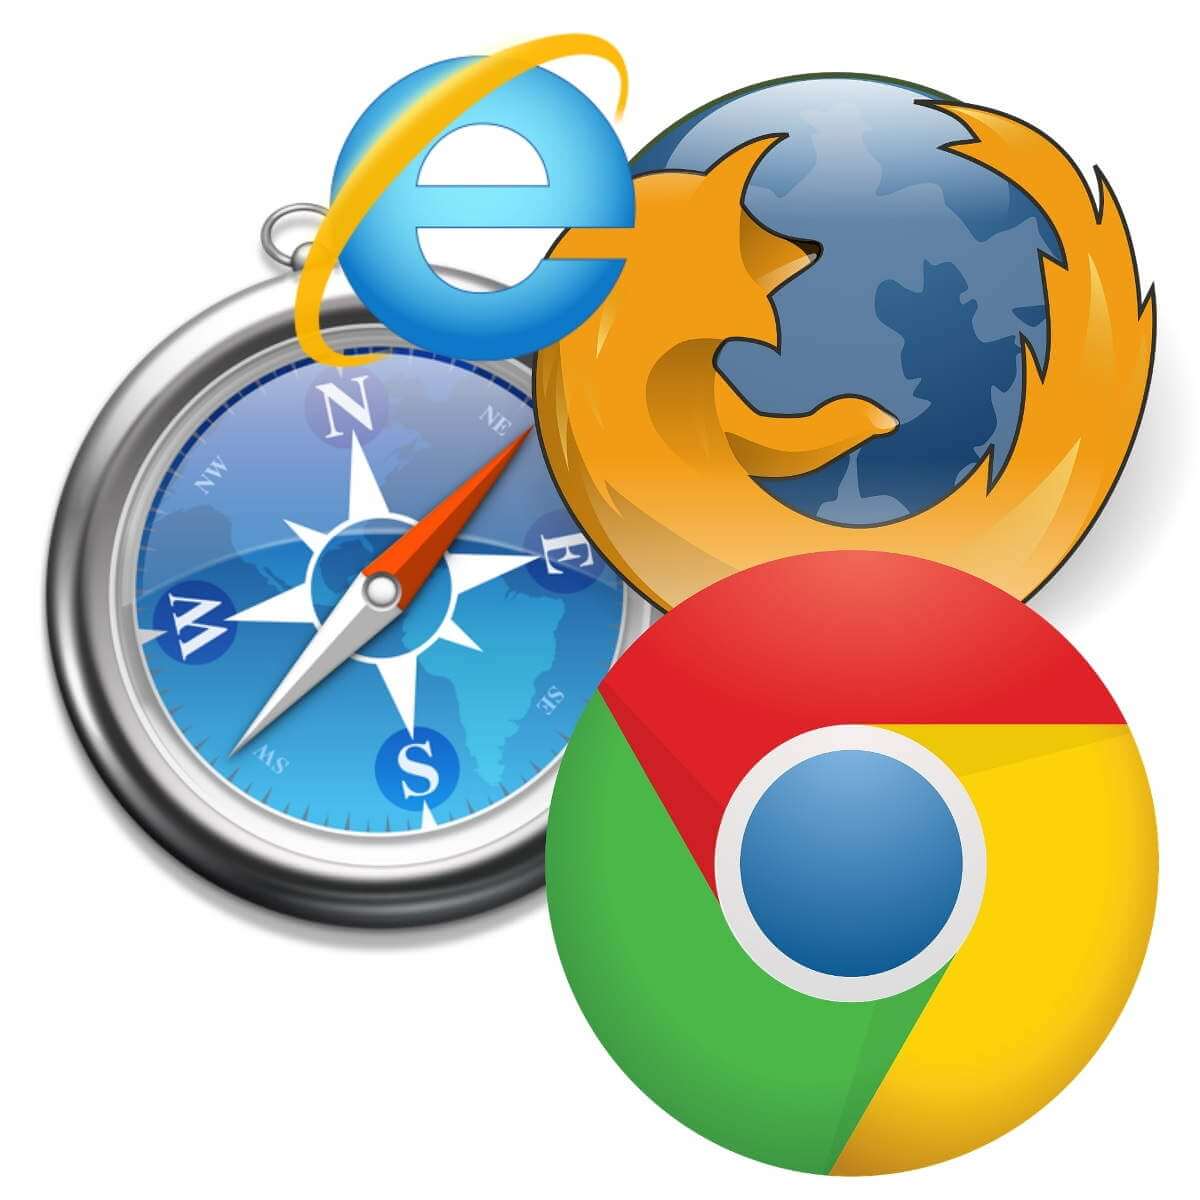 Chrome and other browsers